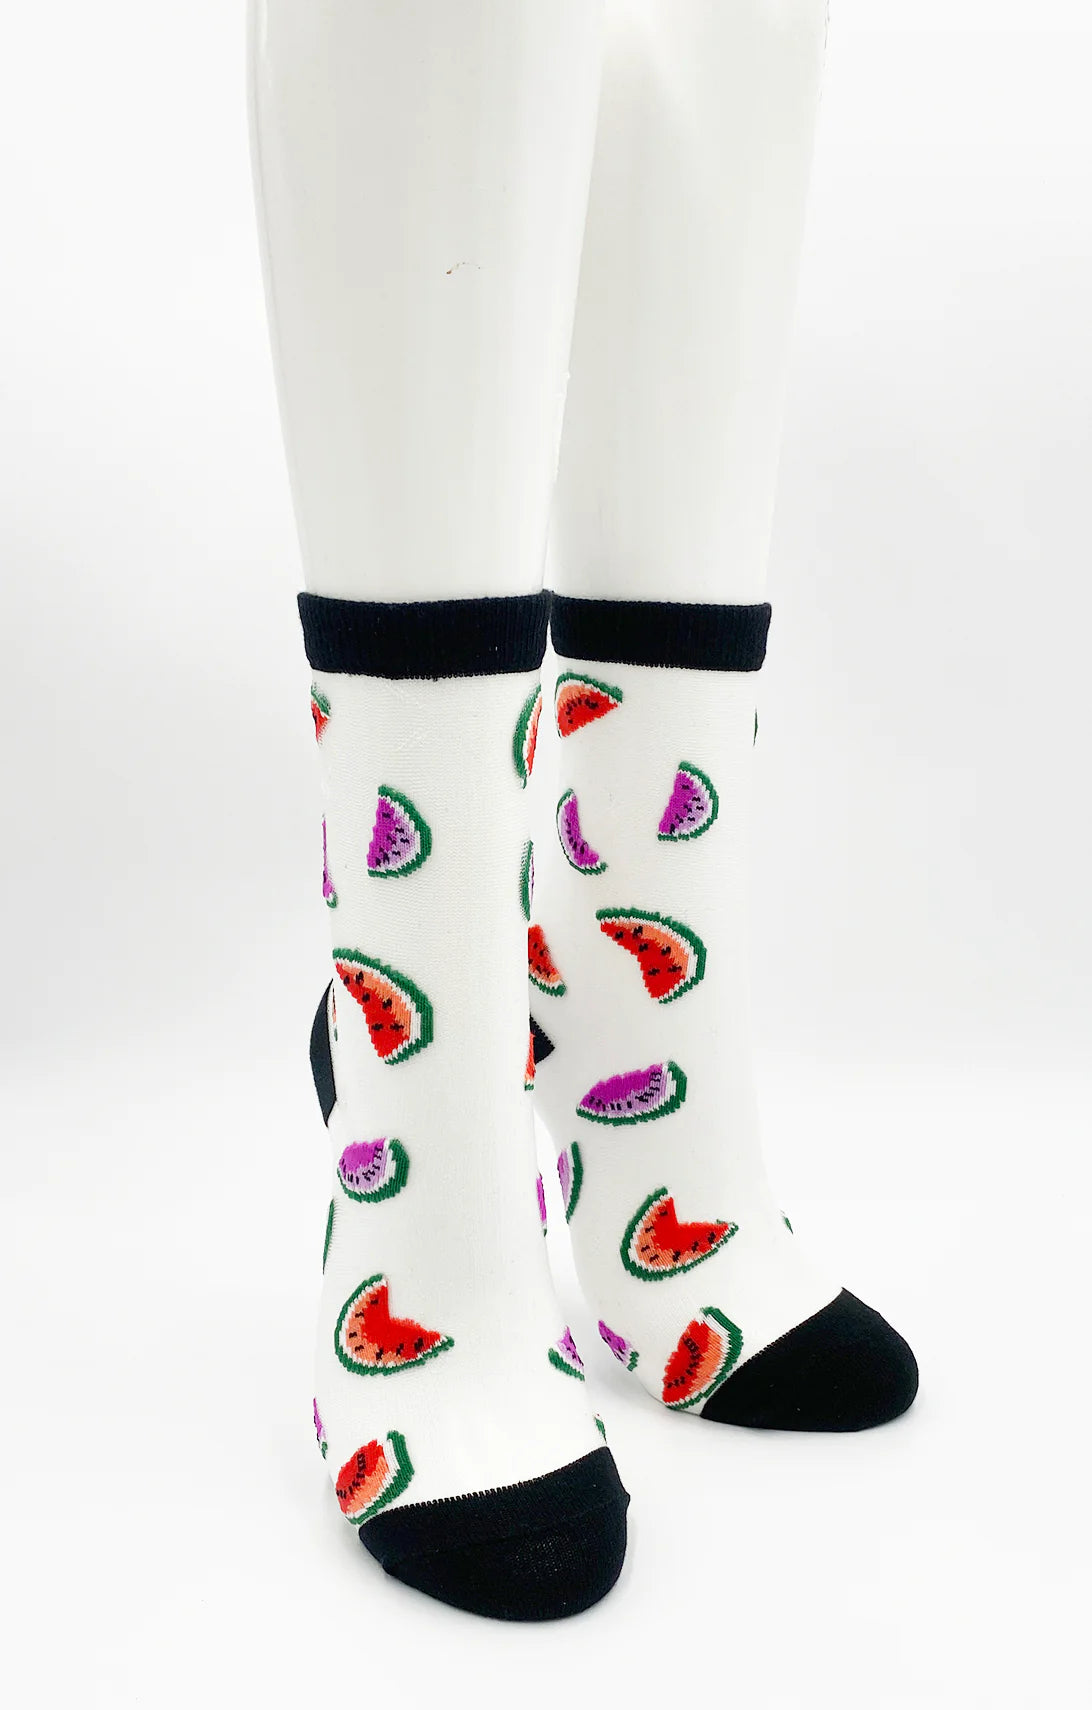 Legs wearing Tabbisocks Watermelon Sheer Socks, a pair of white socks with a cut watermelon pattern and black top and bottom